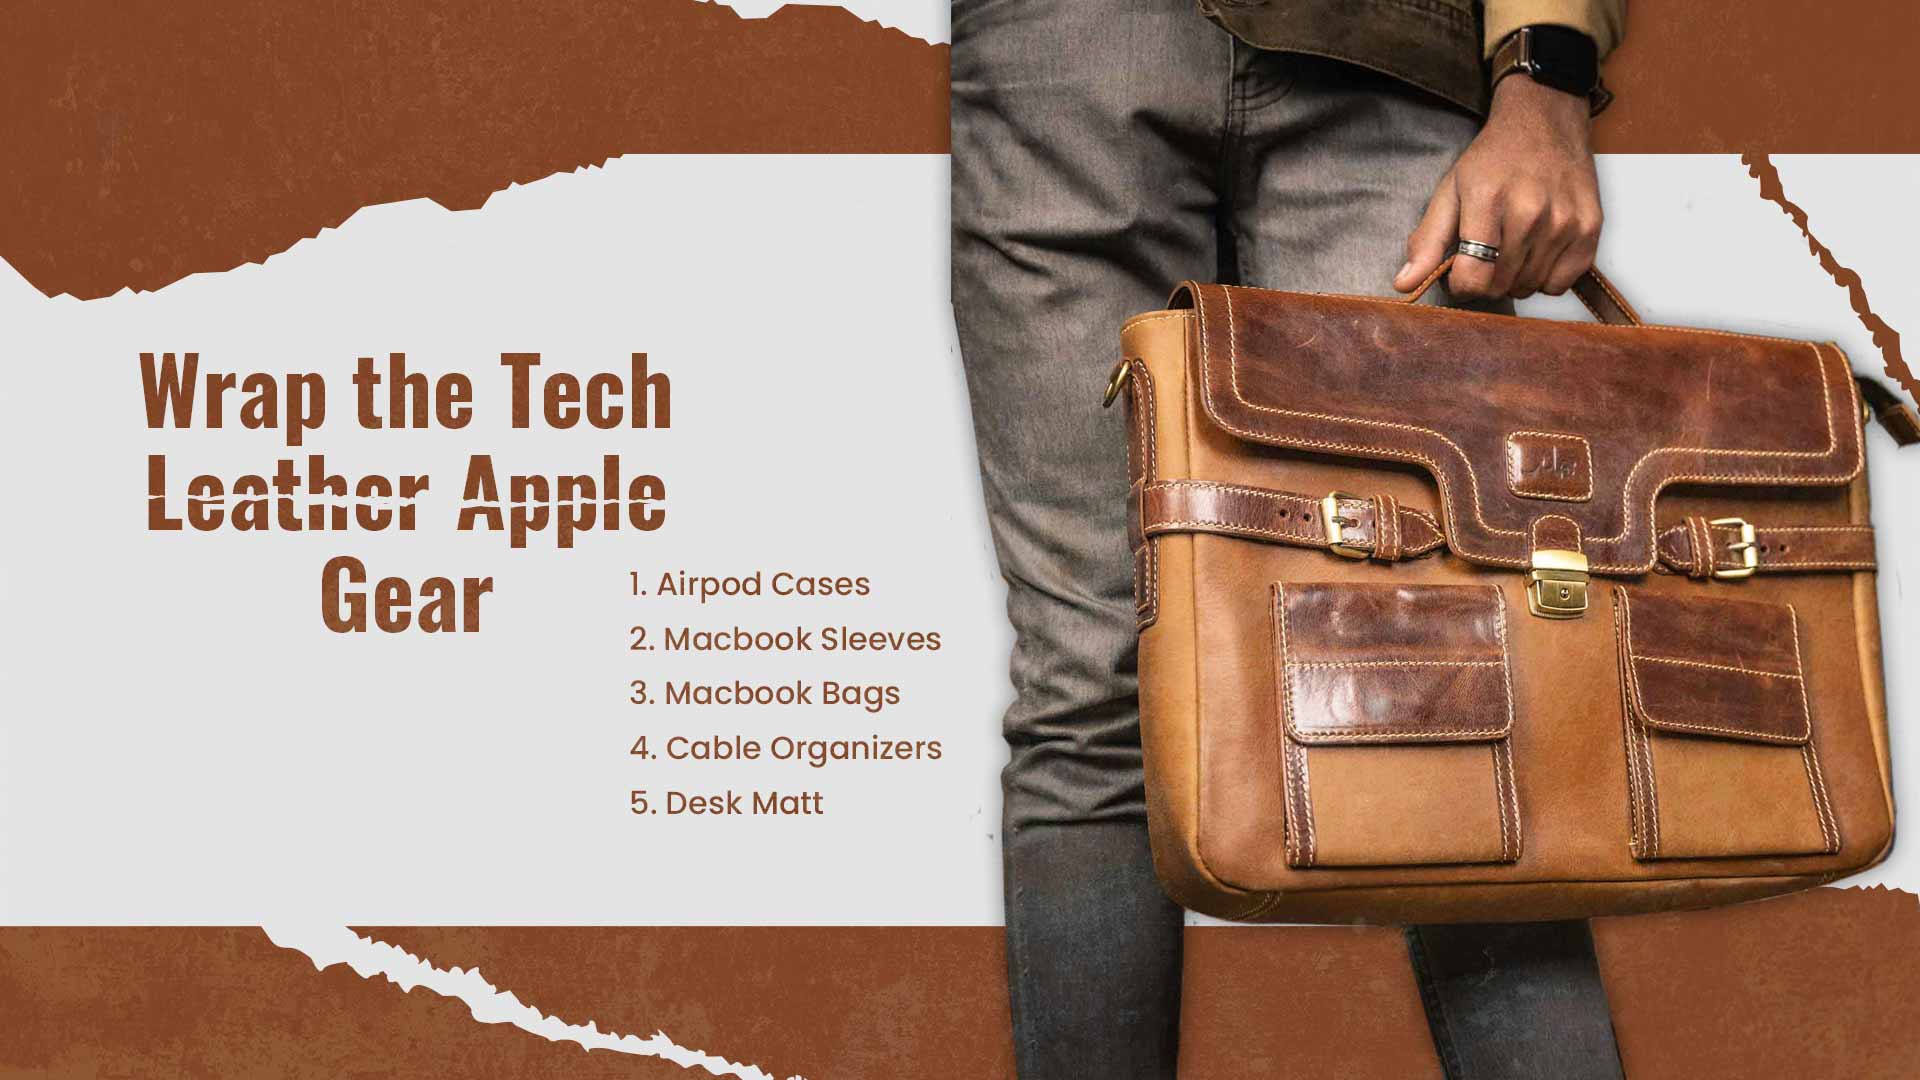 Wrap the Tech in Style with Leather Apple Gear